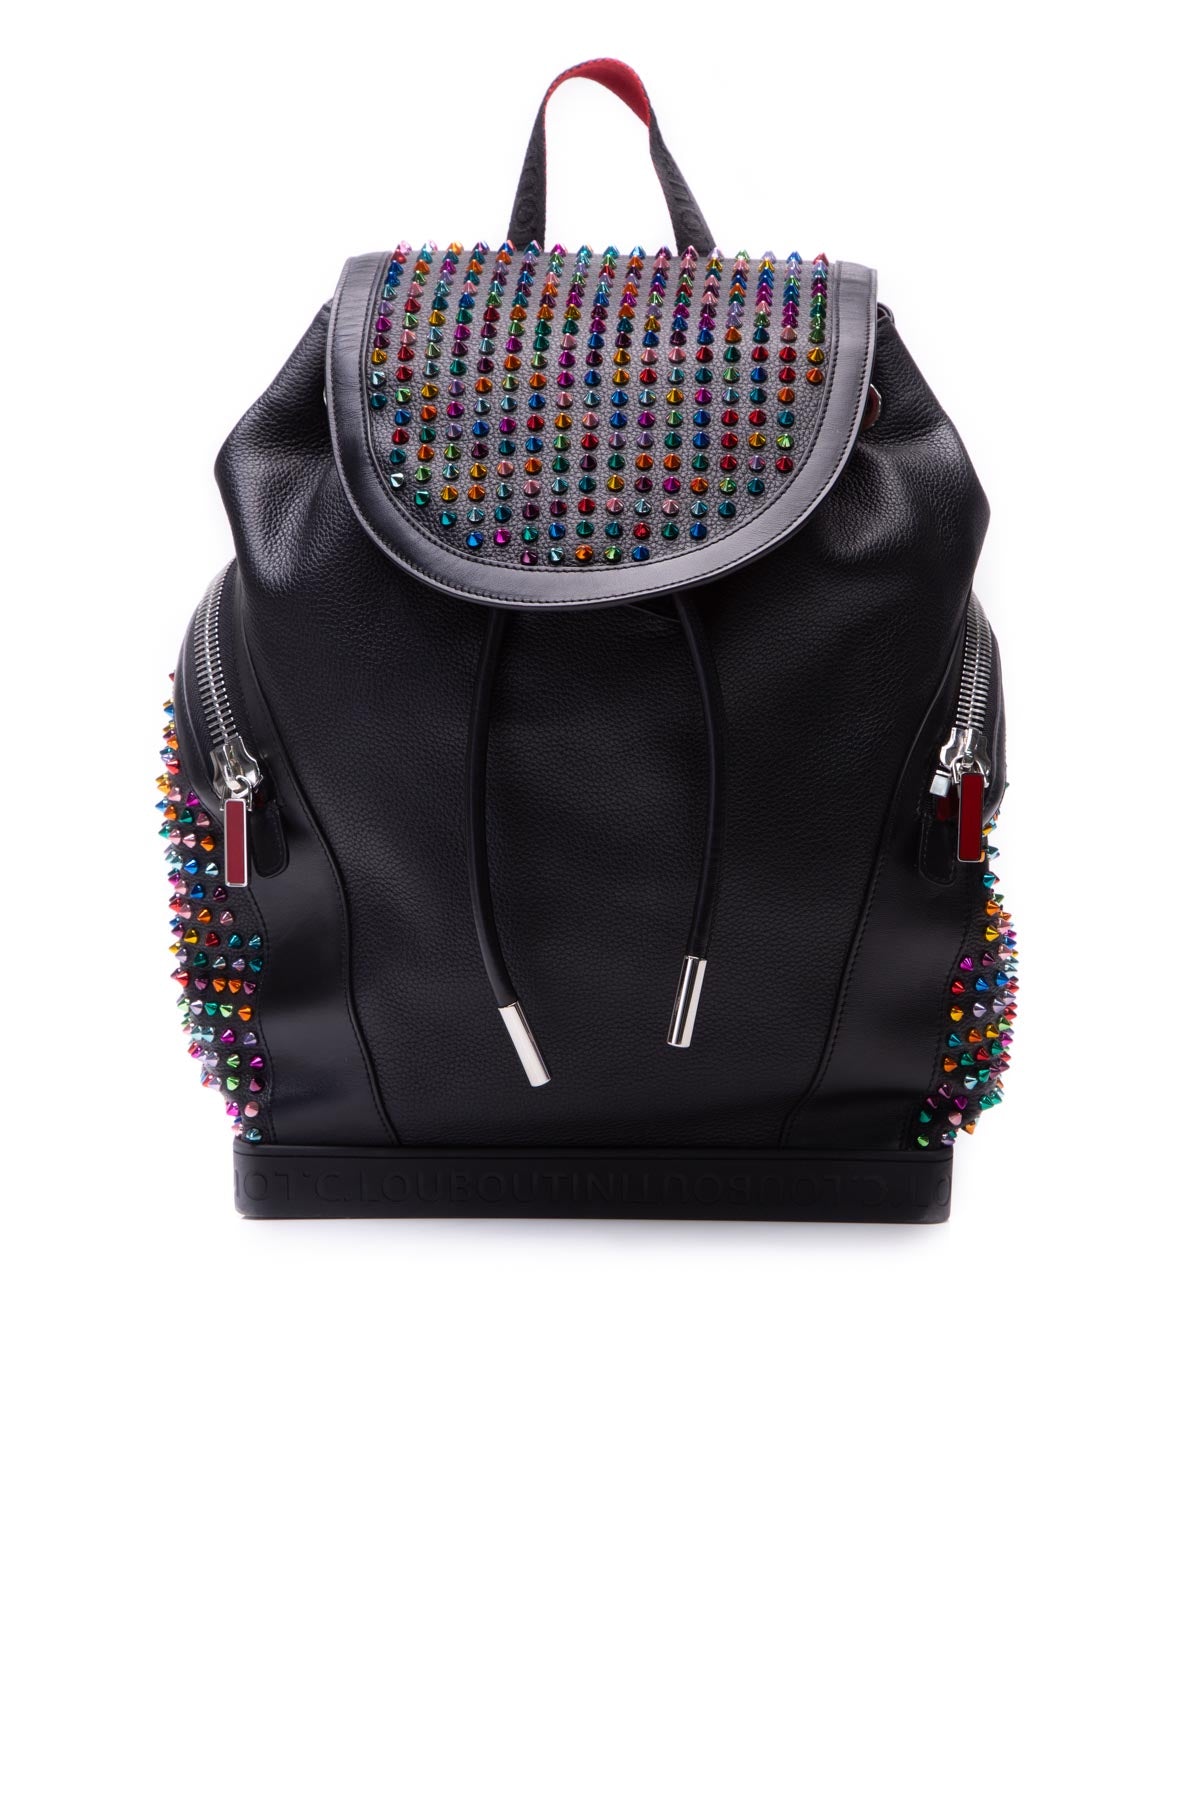 louboutin bag with spikes